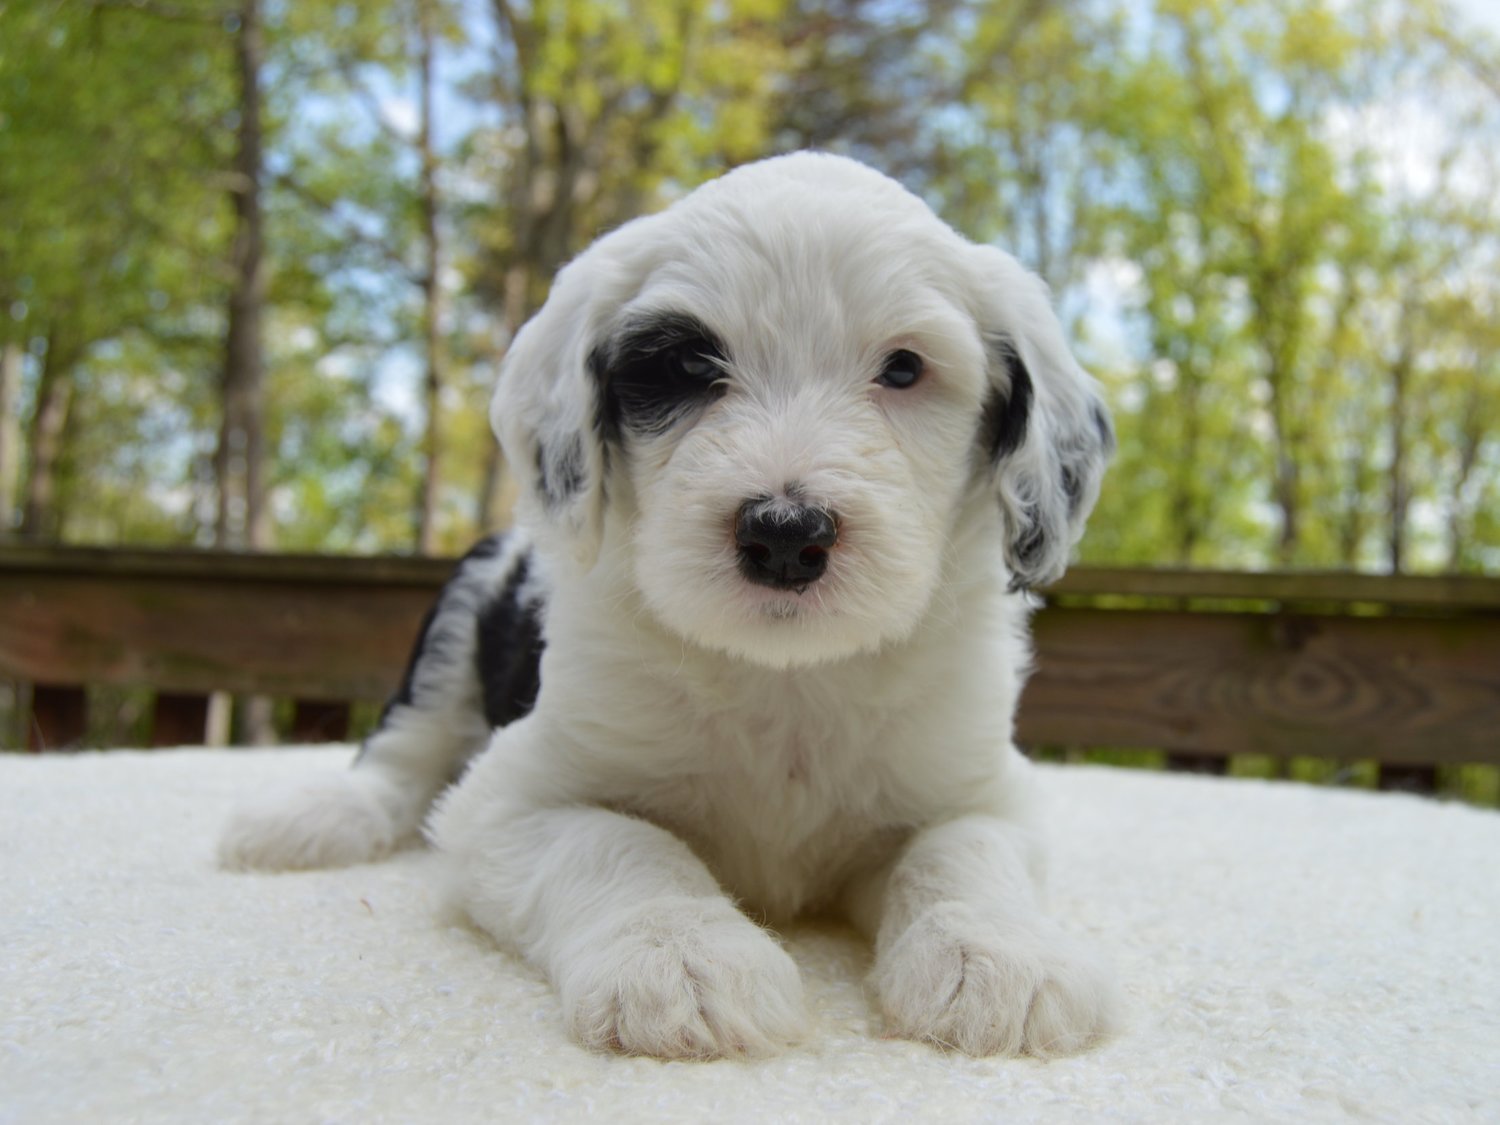 Mini Poodle-Sheepadoodle Puppies for Sale - Puyallup